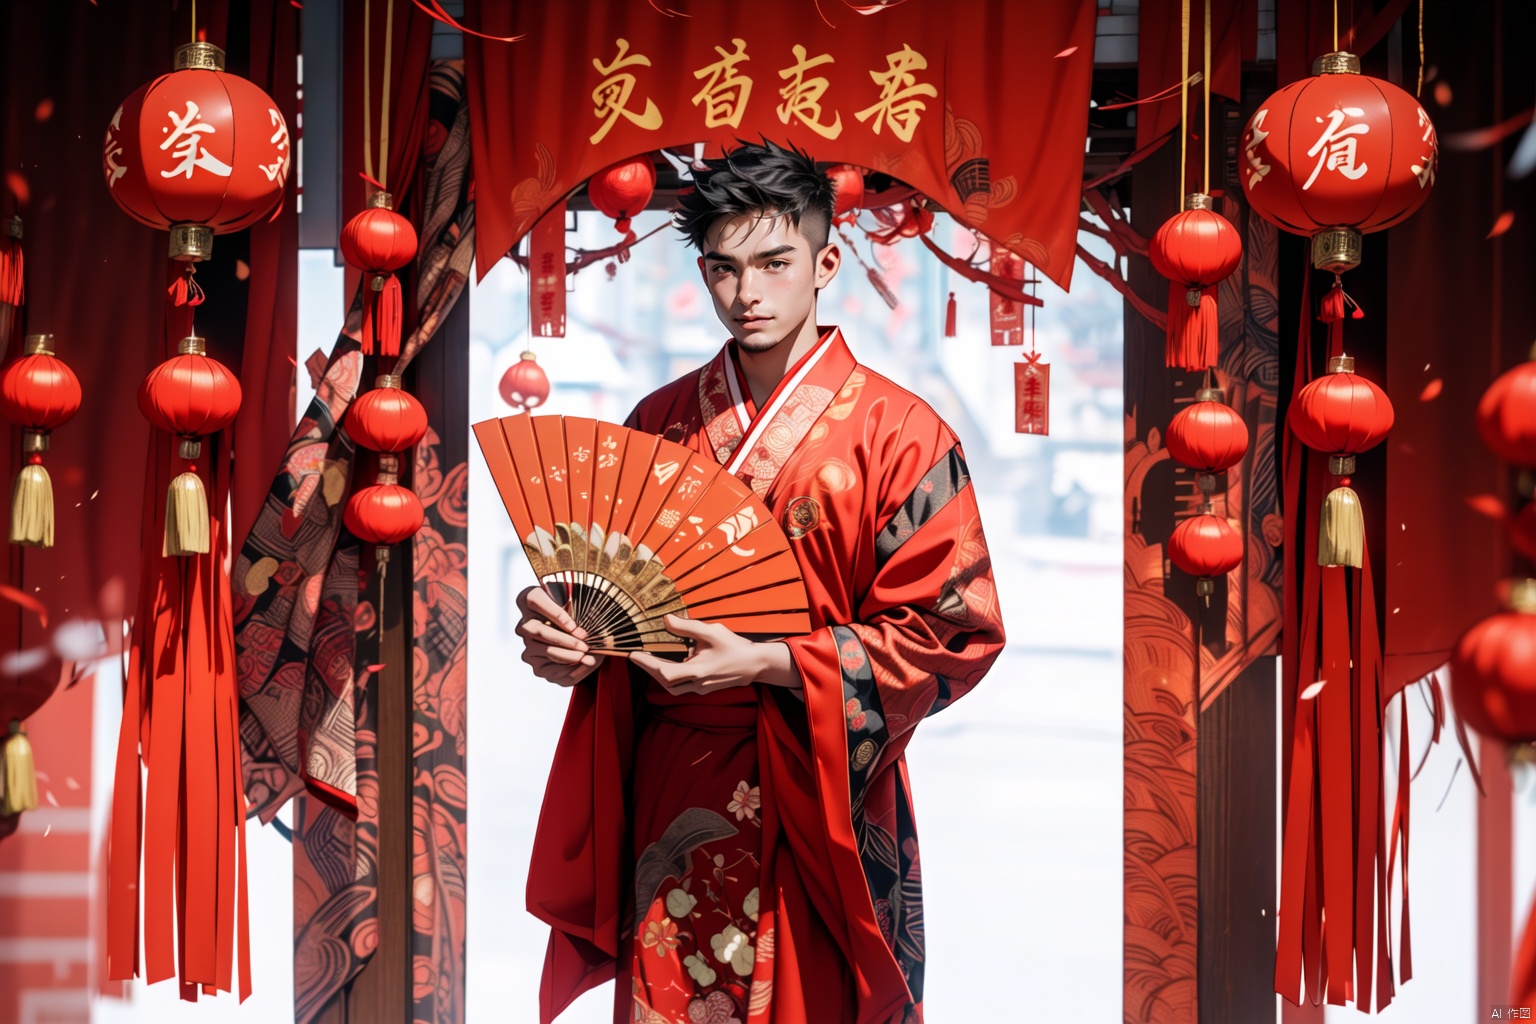  1boy, Arso,Lovely boy, Chinese gown, fan in hand, China New Year in the background, red envelopes, firecrackers,